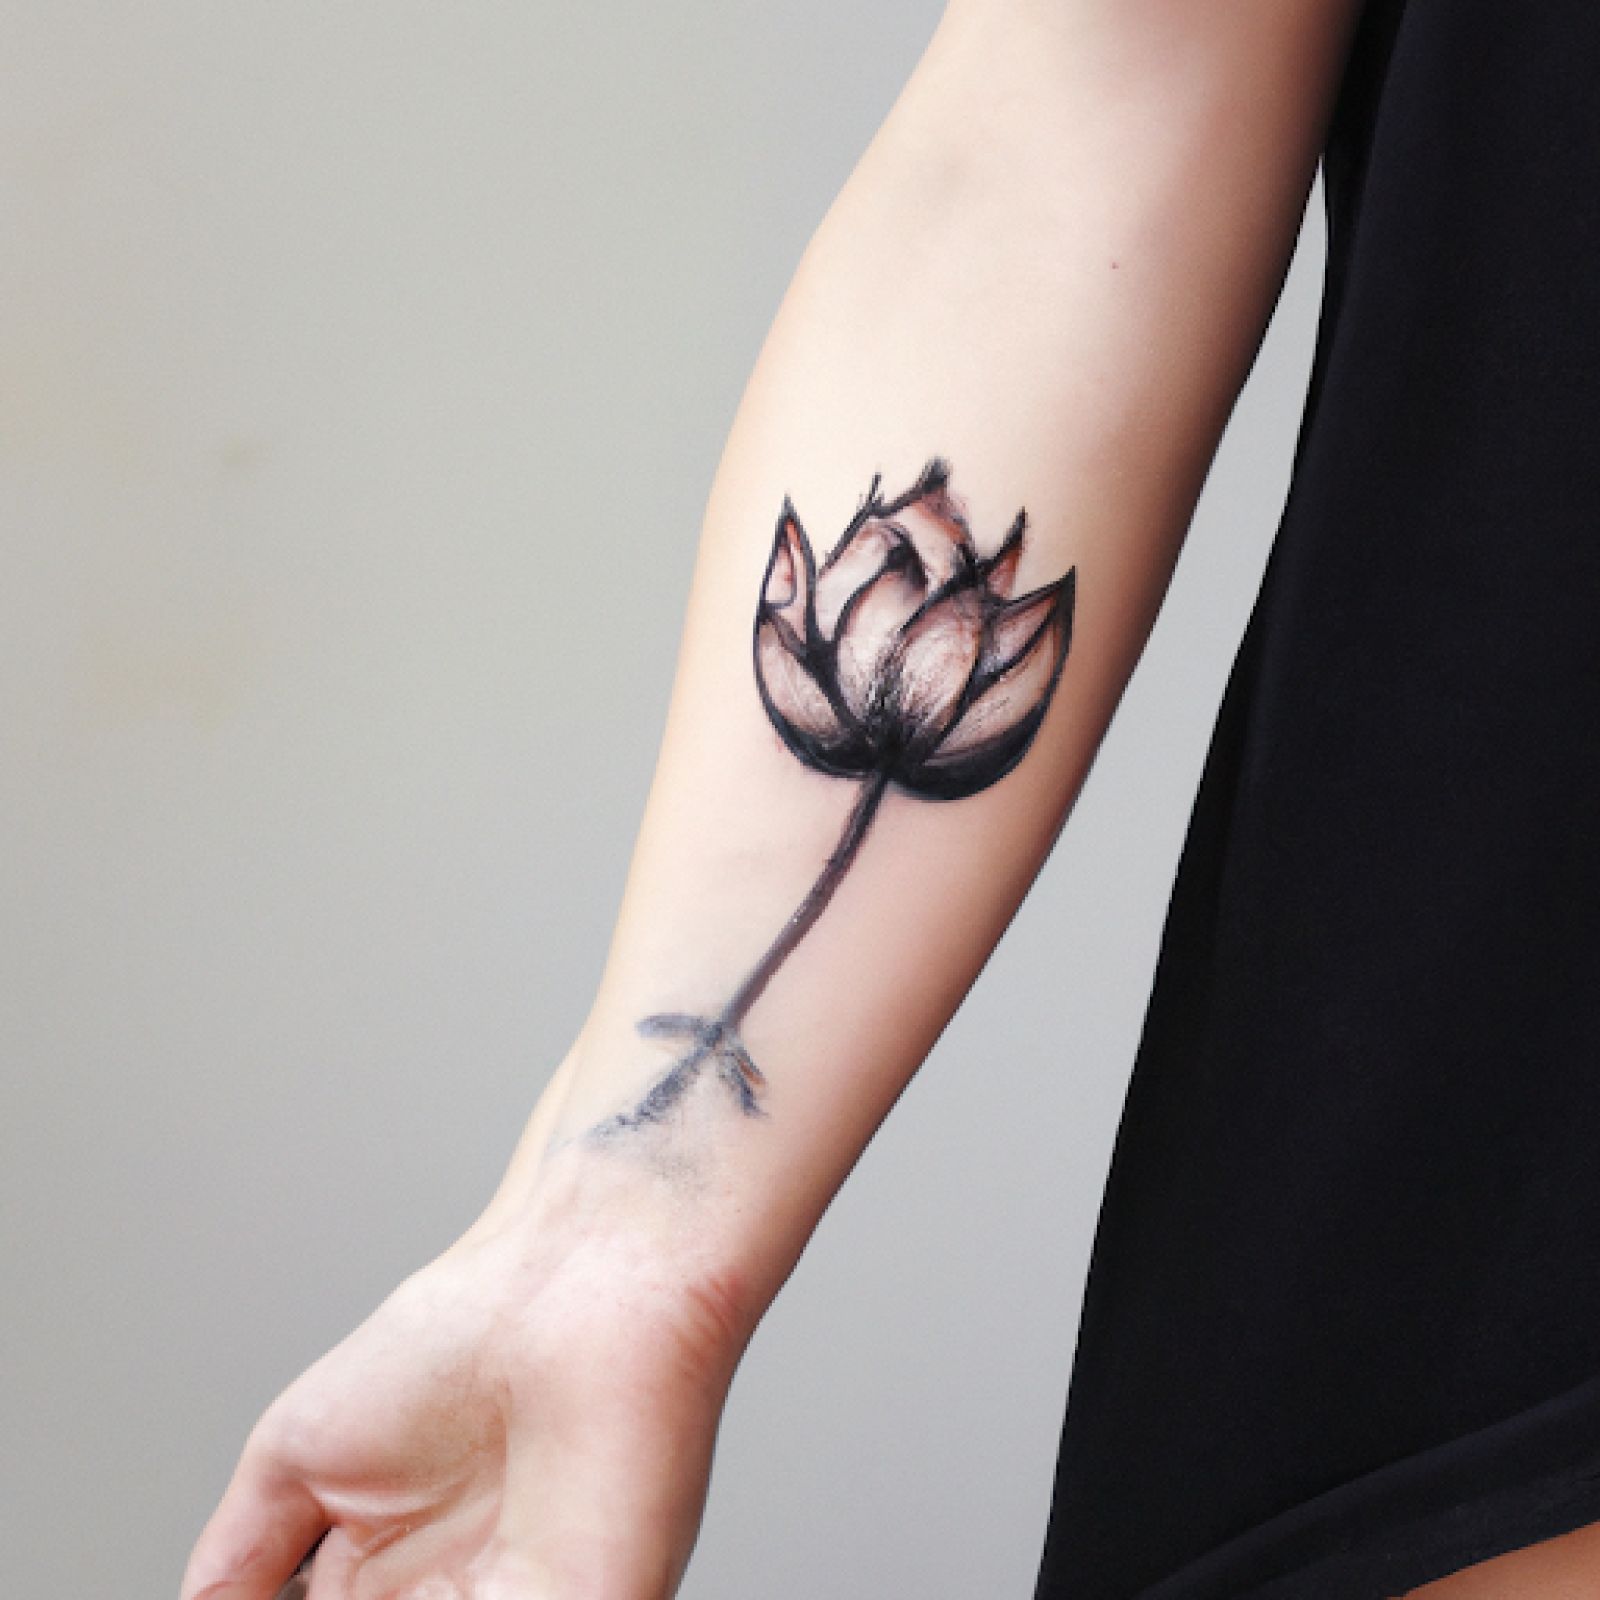 Lotus tattoo on hand for women